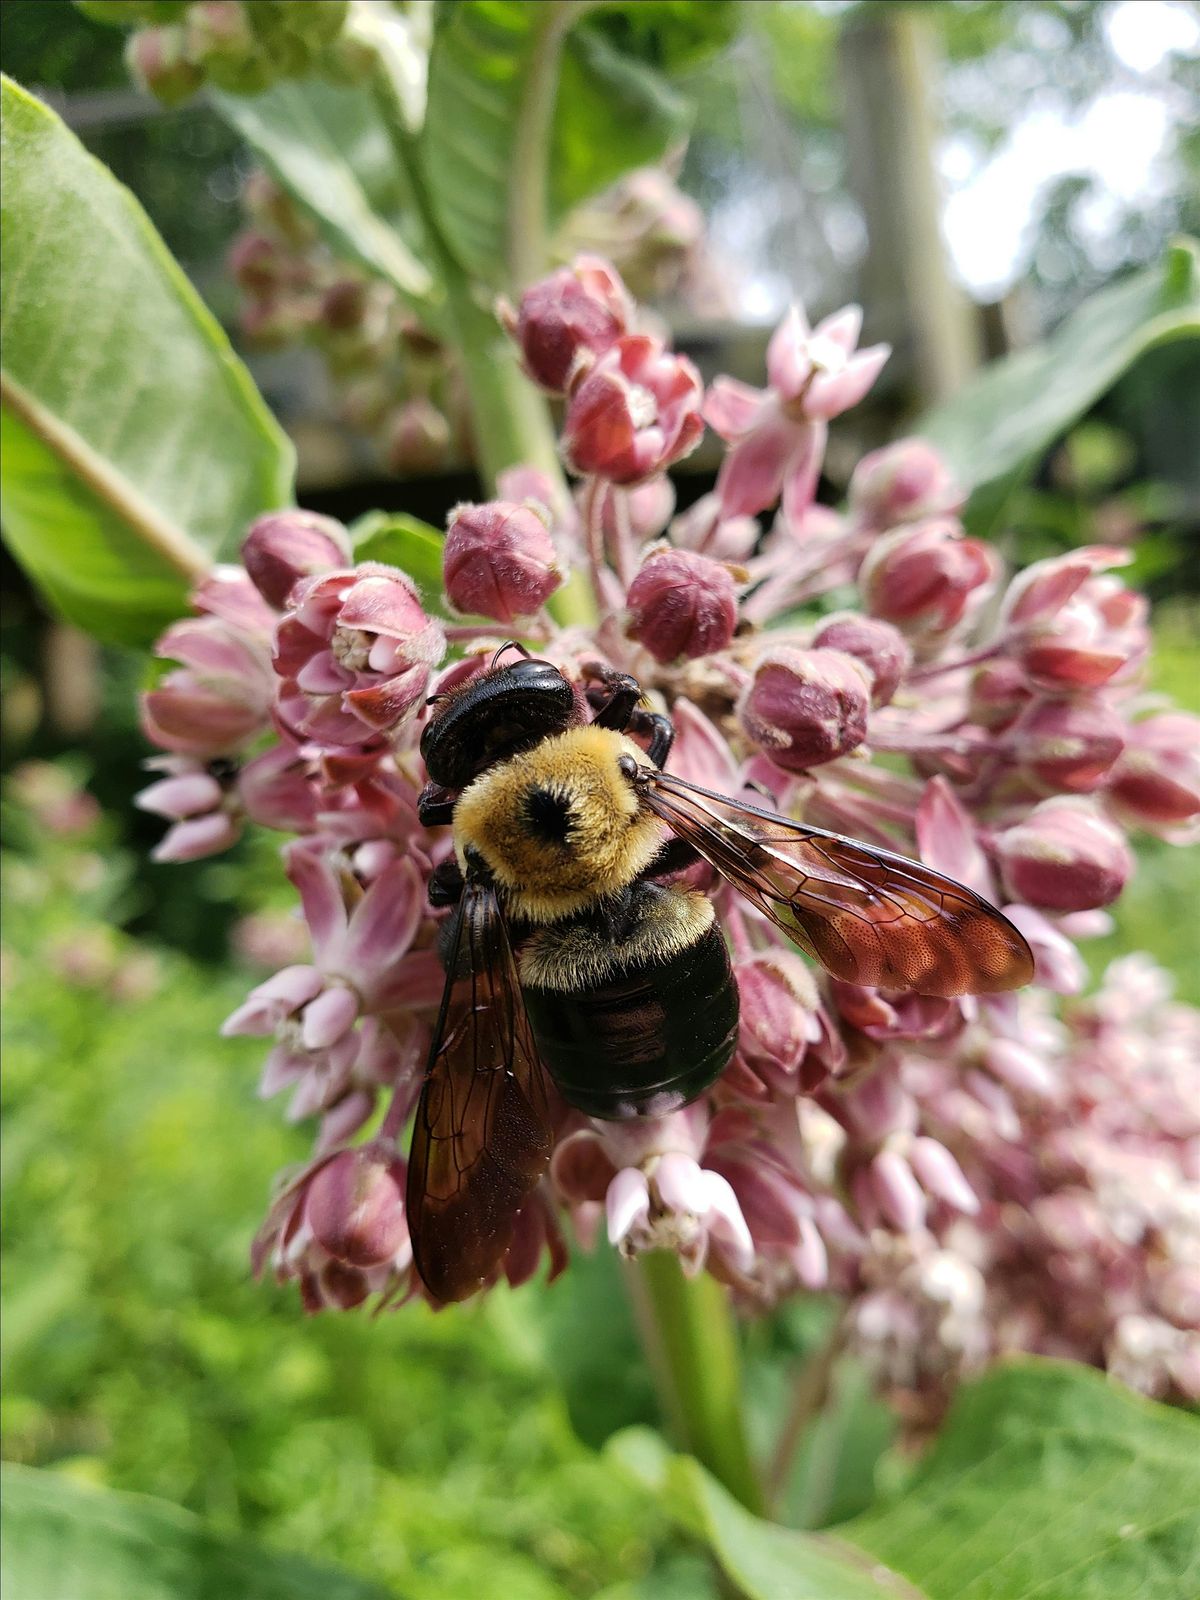 Planting for Pollinators with Joy Bovens